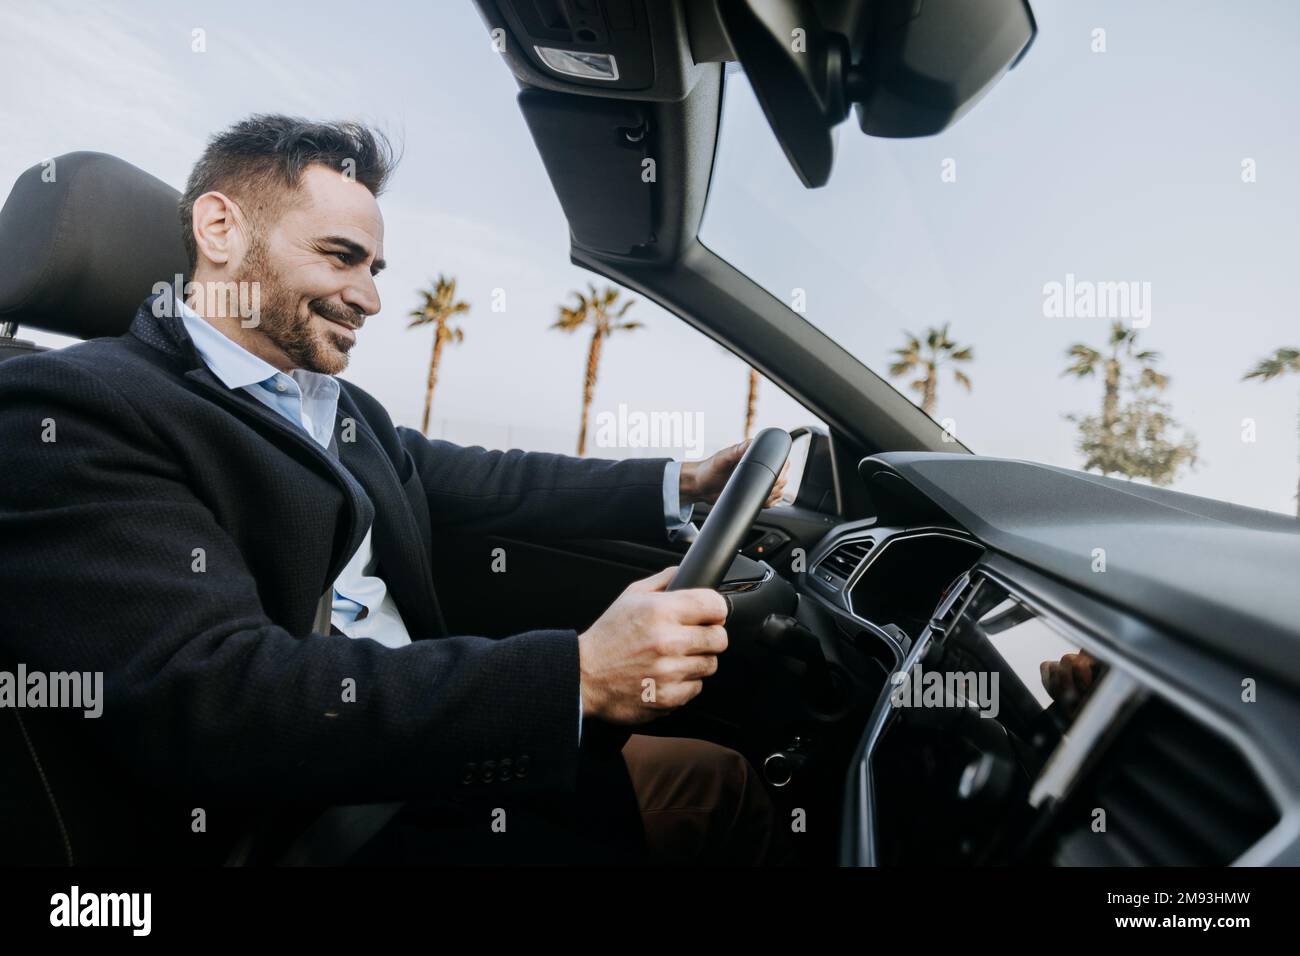 Successful mid adult businessman driving cabriolet car Stock Photo